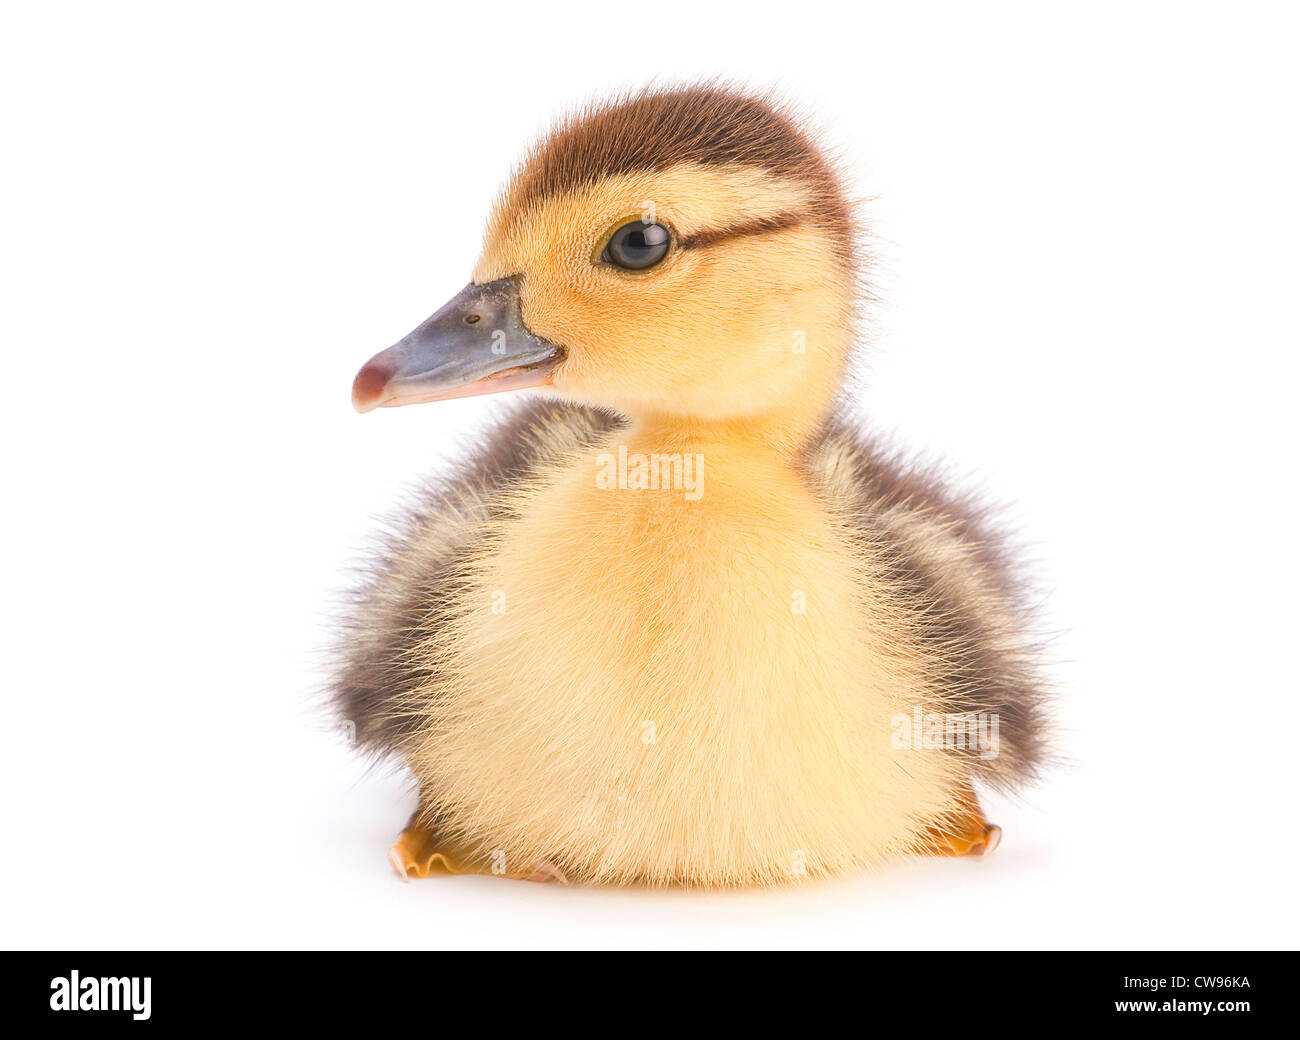 Brown duckling closeup on white background Stock Photo